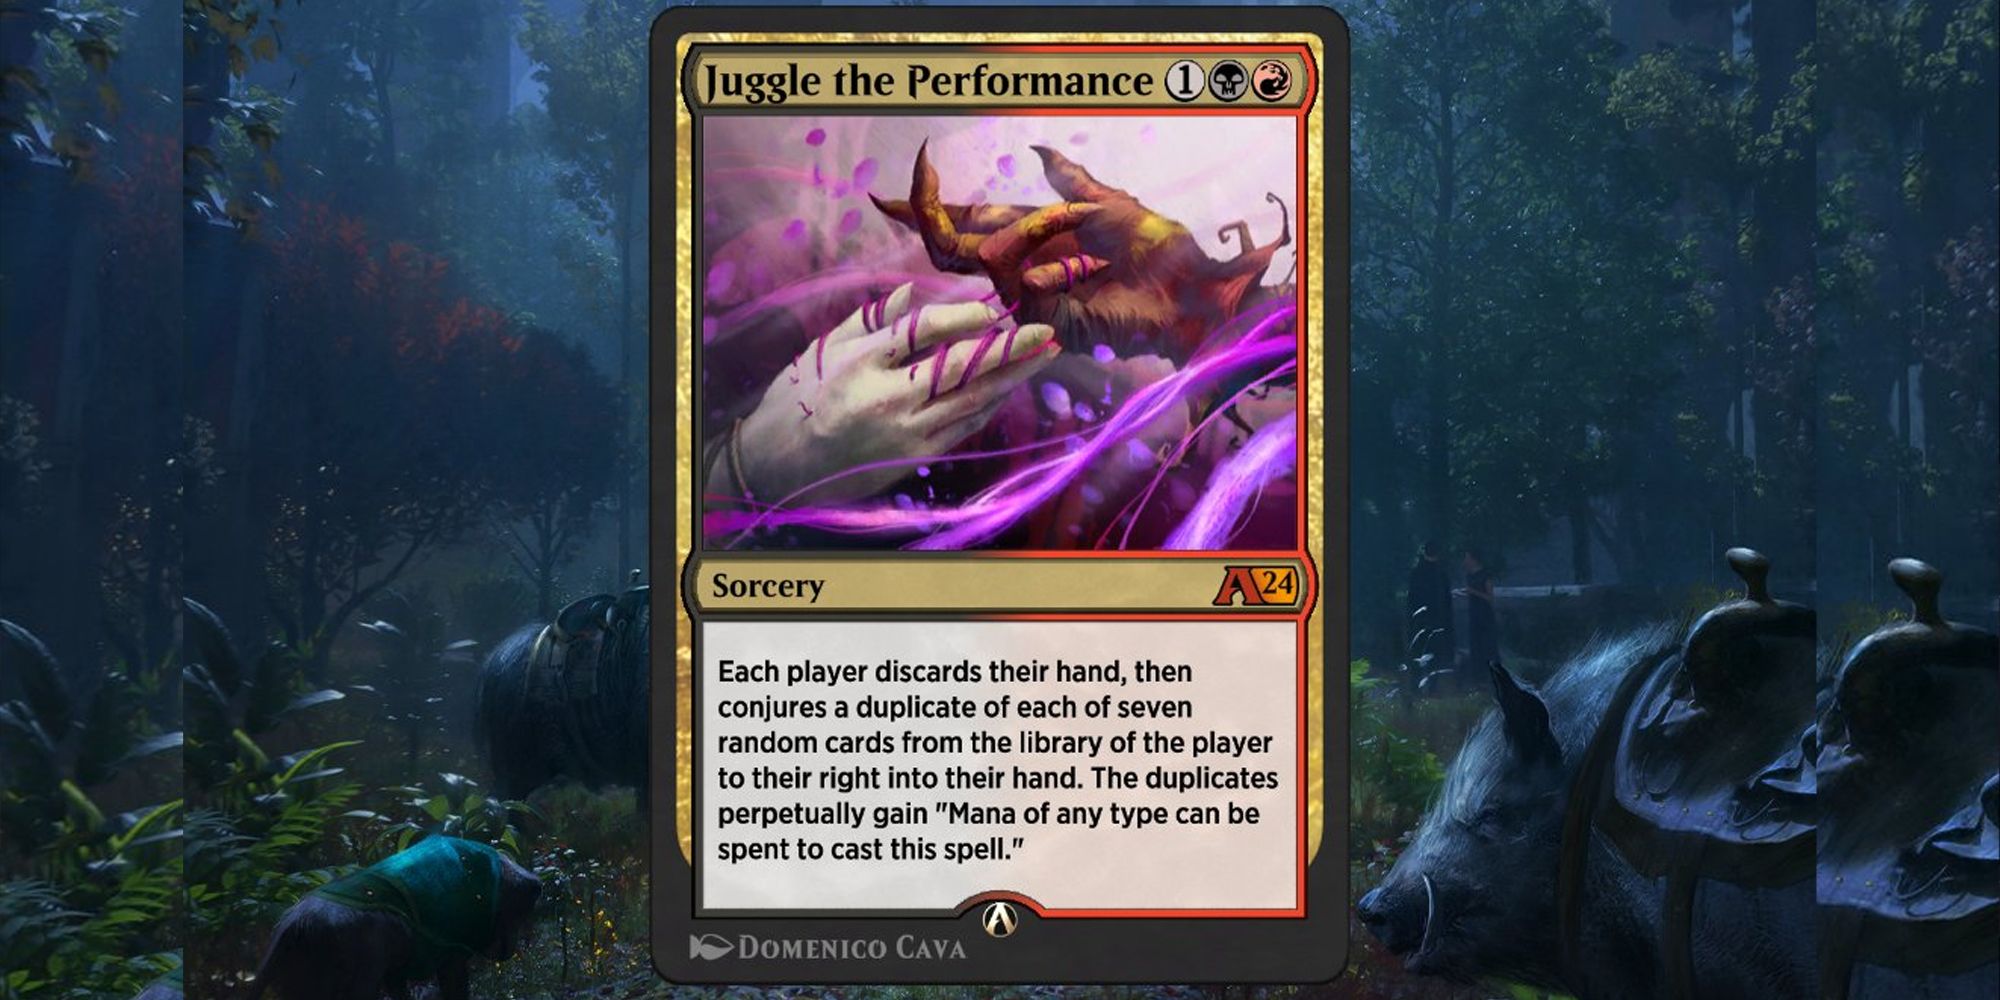 MTG Arena Juggle the Performance card over a forest background at night